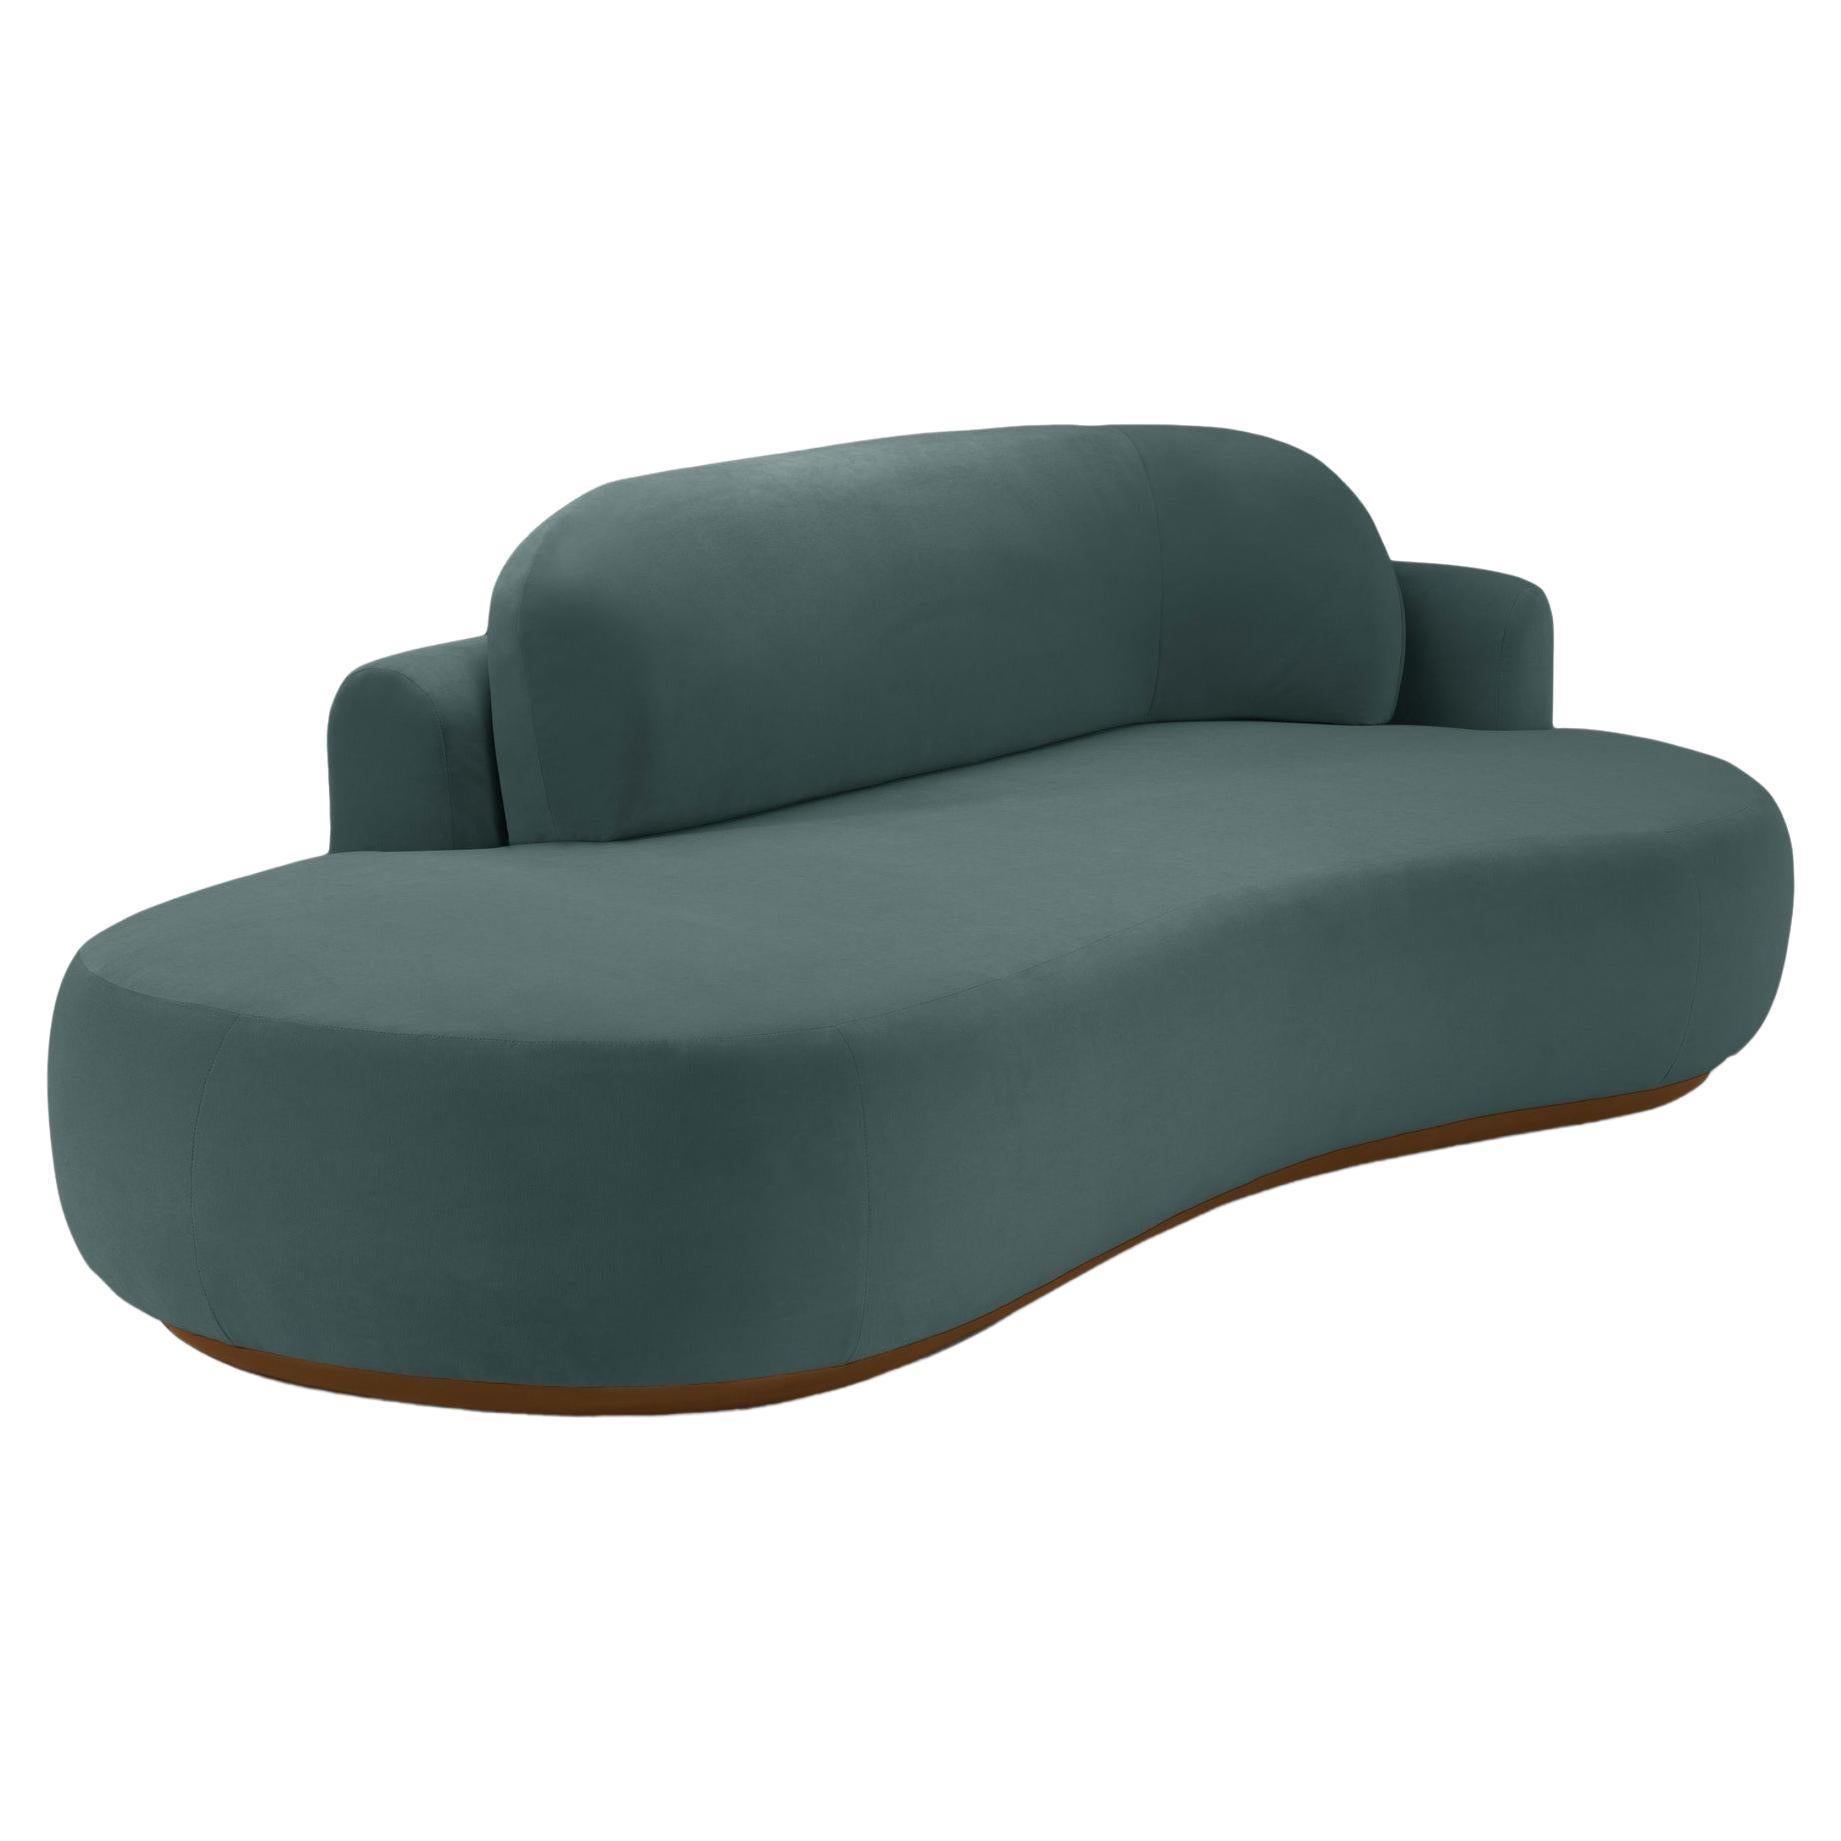 Naked Curved Sofa Single with Beech Ash-056-1 and Teal